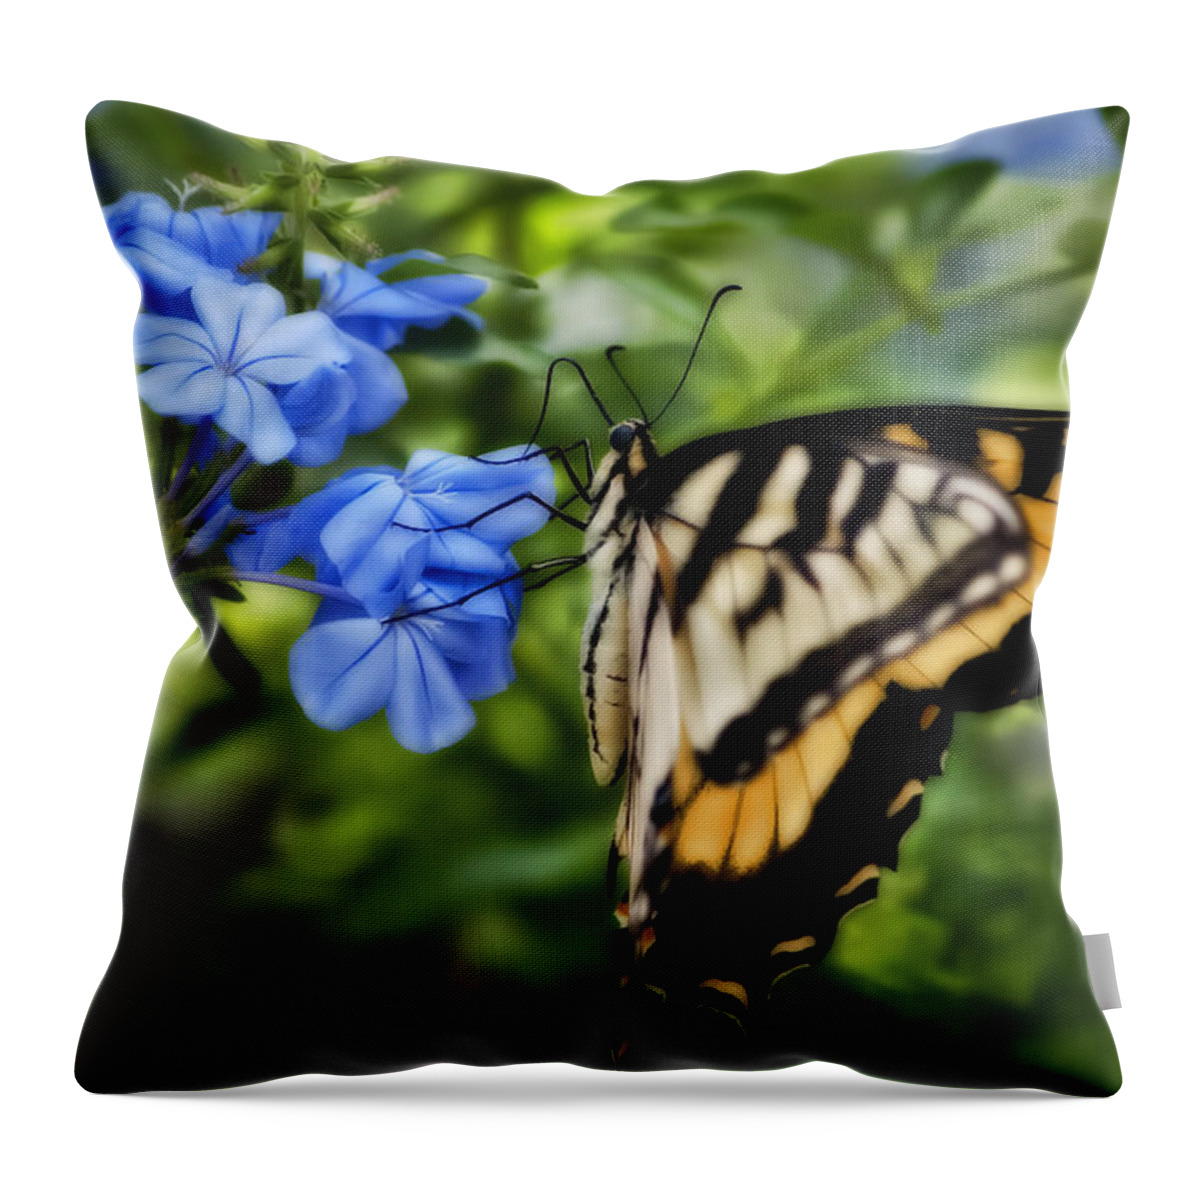 Plumbago Throw Pillow featuring the photograph Plumbago and Swallowtail by Steven Sparks